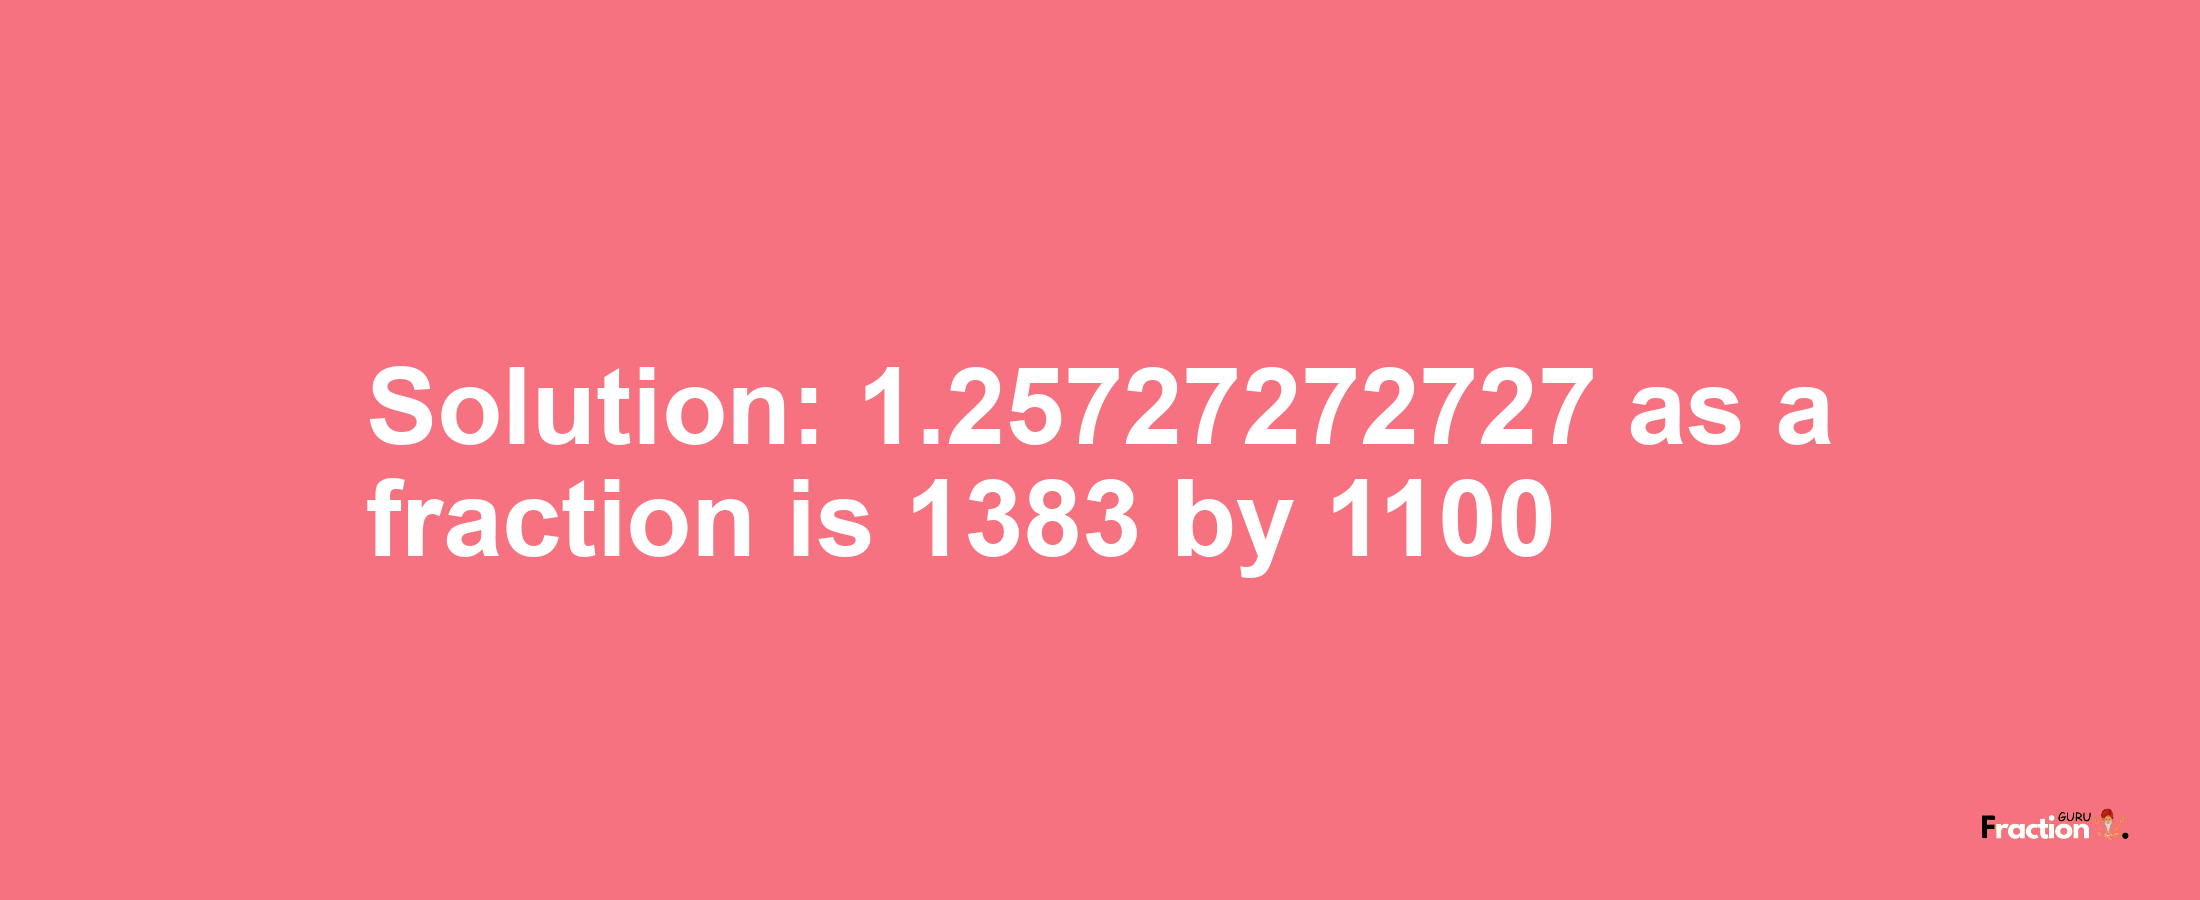 Solution:1.25727272727 as a fraction is 1383/1100